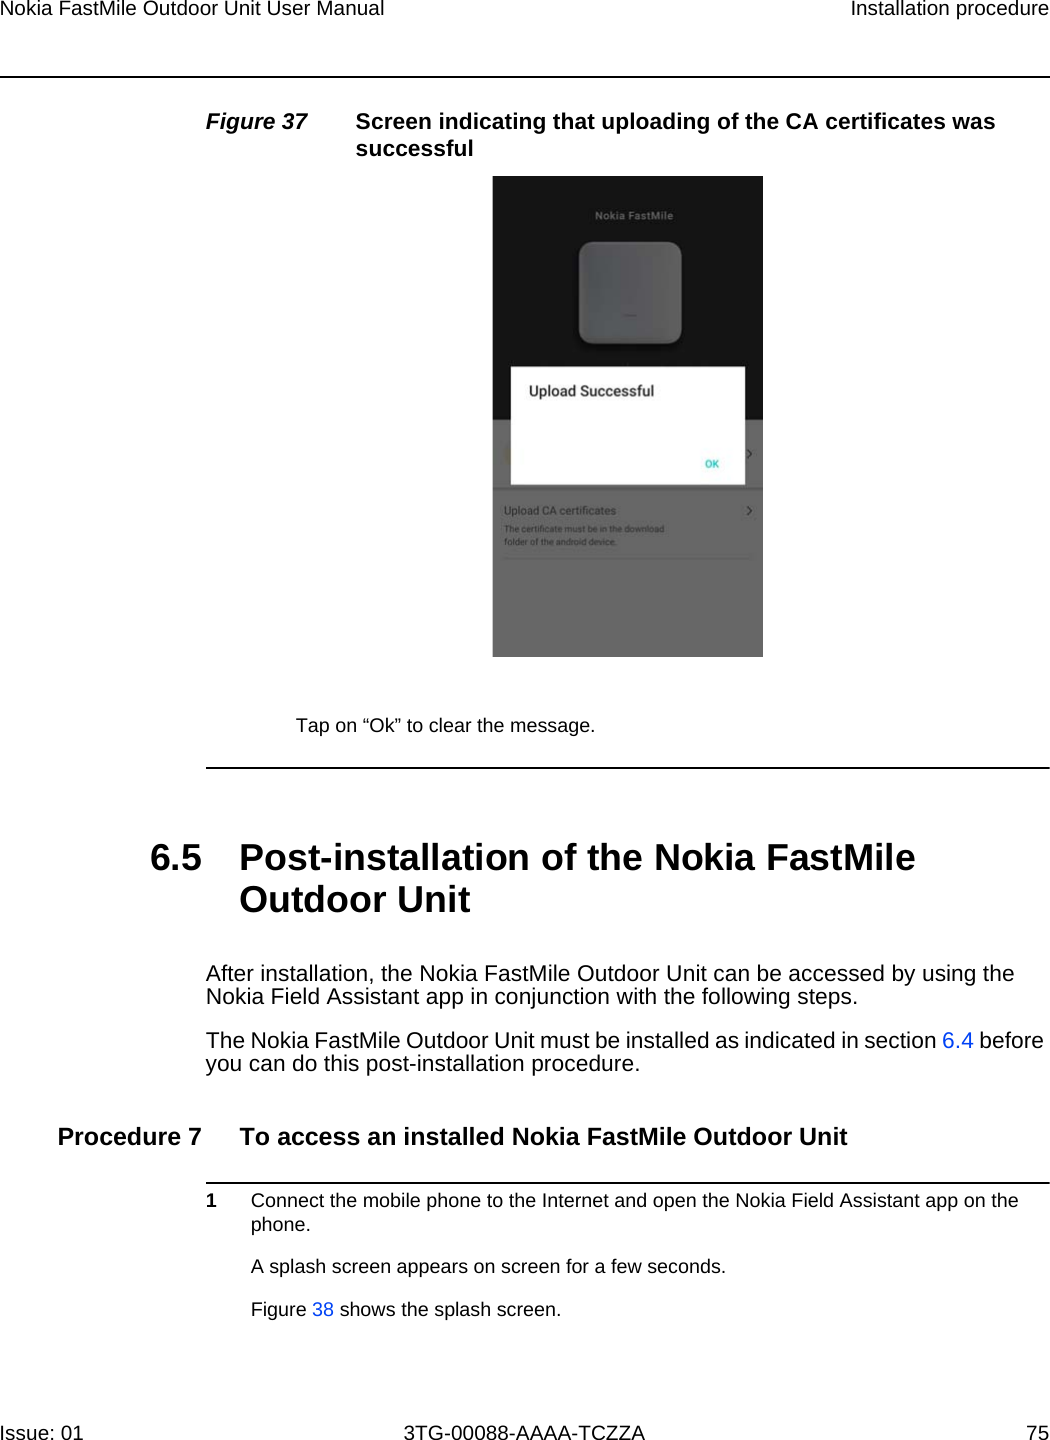 Nokia FastMile Outdoor Unit User Manual Installation procedureIssue: 01 3TG-00088-AAAA-TCZZA 75 Figure 37 Screen indicating that uploading of the CA certificates was successfulTap on “Ok” to clear the message.6.5 Post-installation of the Nokia FastMile Outdoor UnitAfter installation, the Nokia FastMile Outdoor Unit can be accessed by using the Nokia Field Assistant app in conjunction with the following steps.The Nokia FastMile Outdoor Unit must be installed as indicated in section 6.4 before you can do this post-installation procedure.Procedure 7 To access an installed Nokia FastMile Outdoor Unit1Connect the mobile phone to the Internet and open the Nokia Field Assistant app on the phone.A splash screen appears on screen for a few seconds.Figure 38 shows the splash screen.